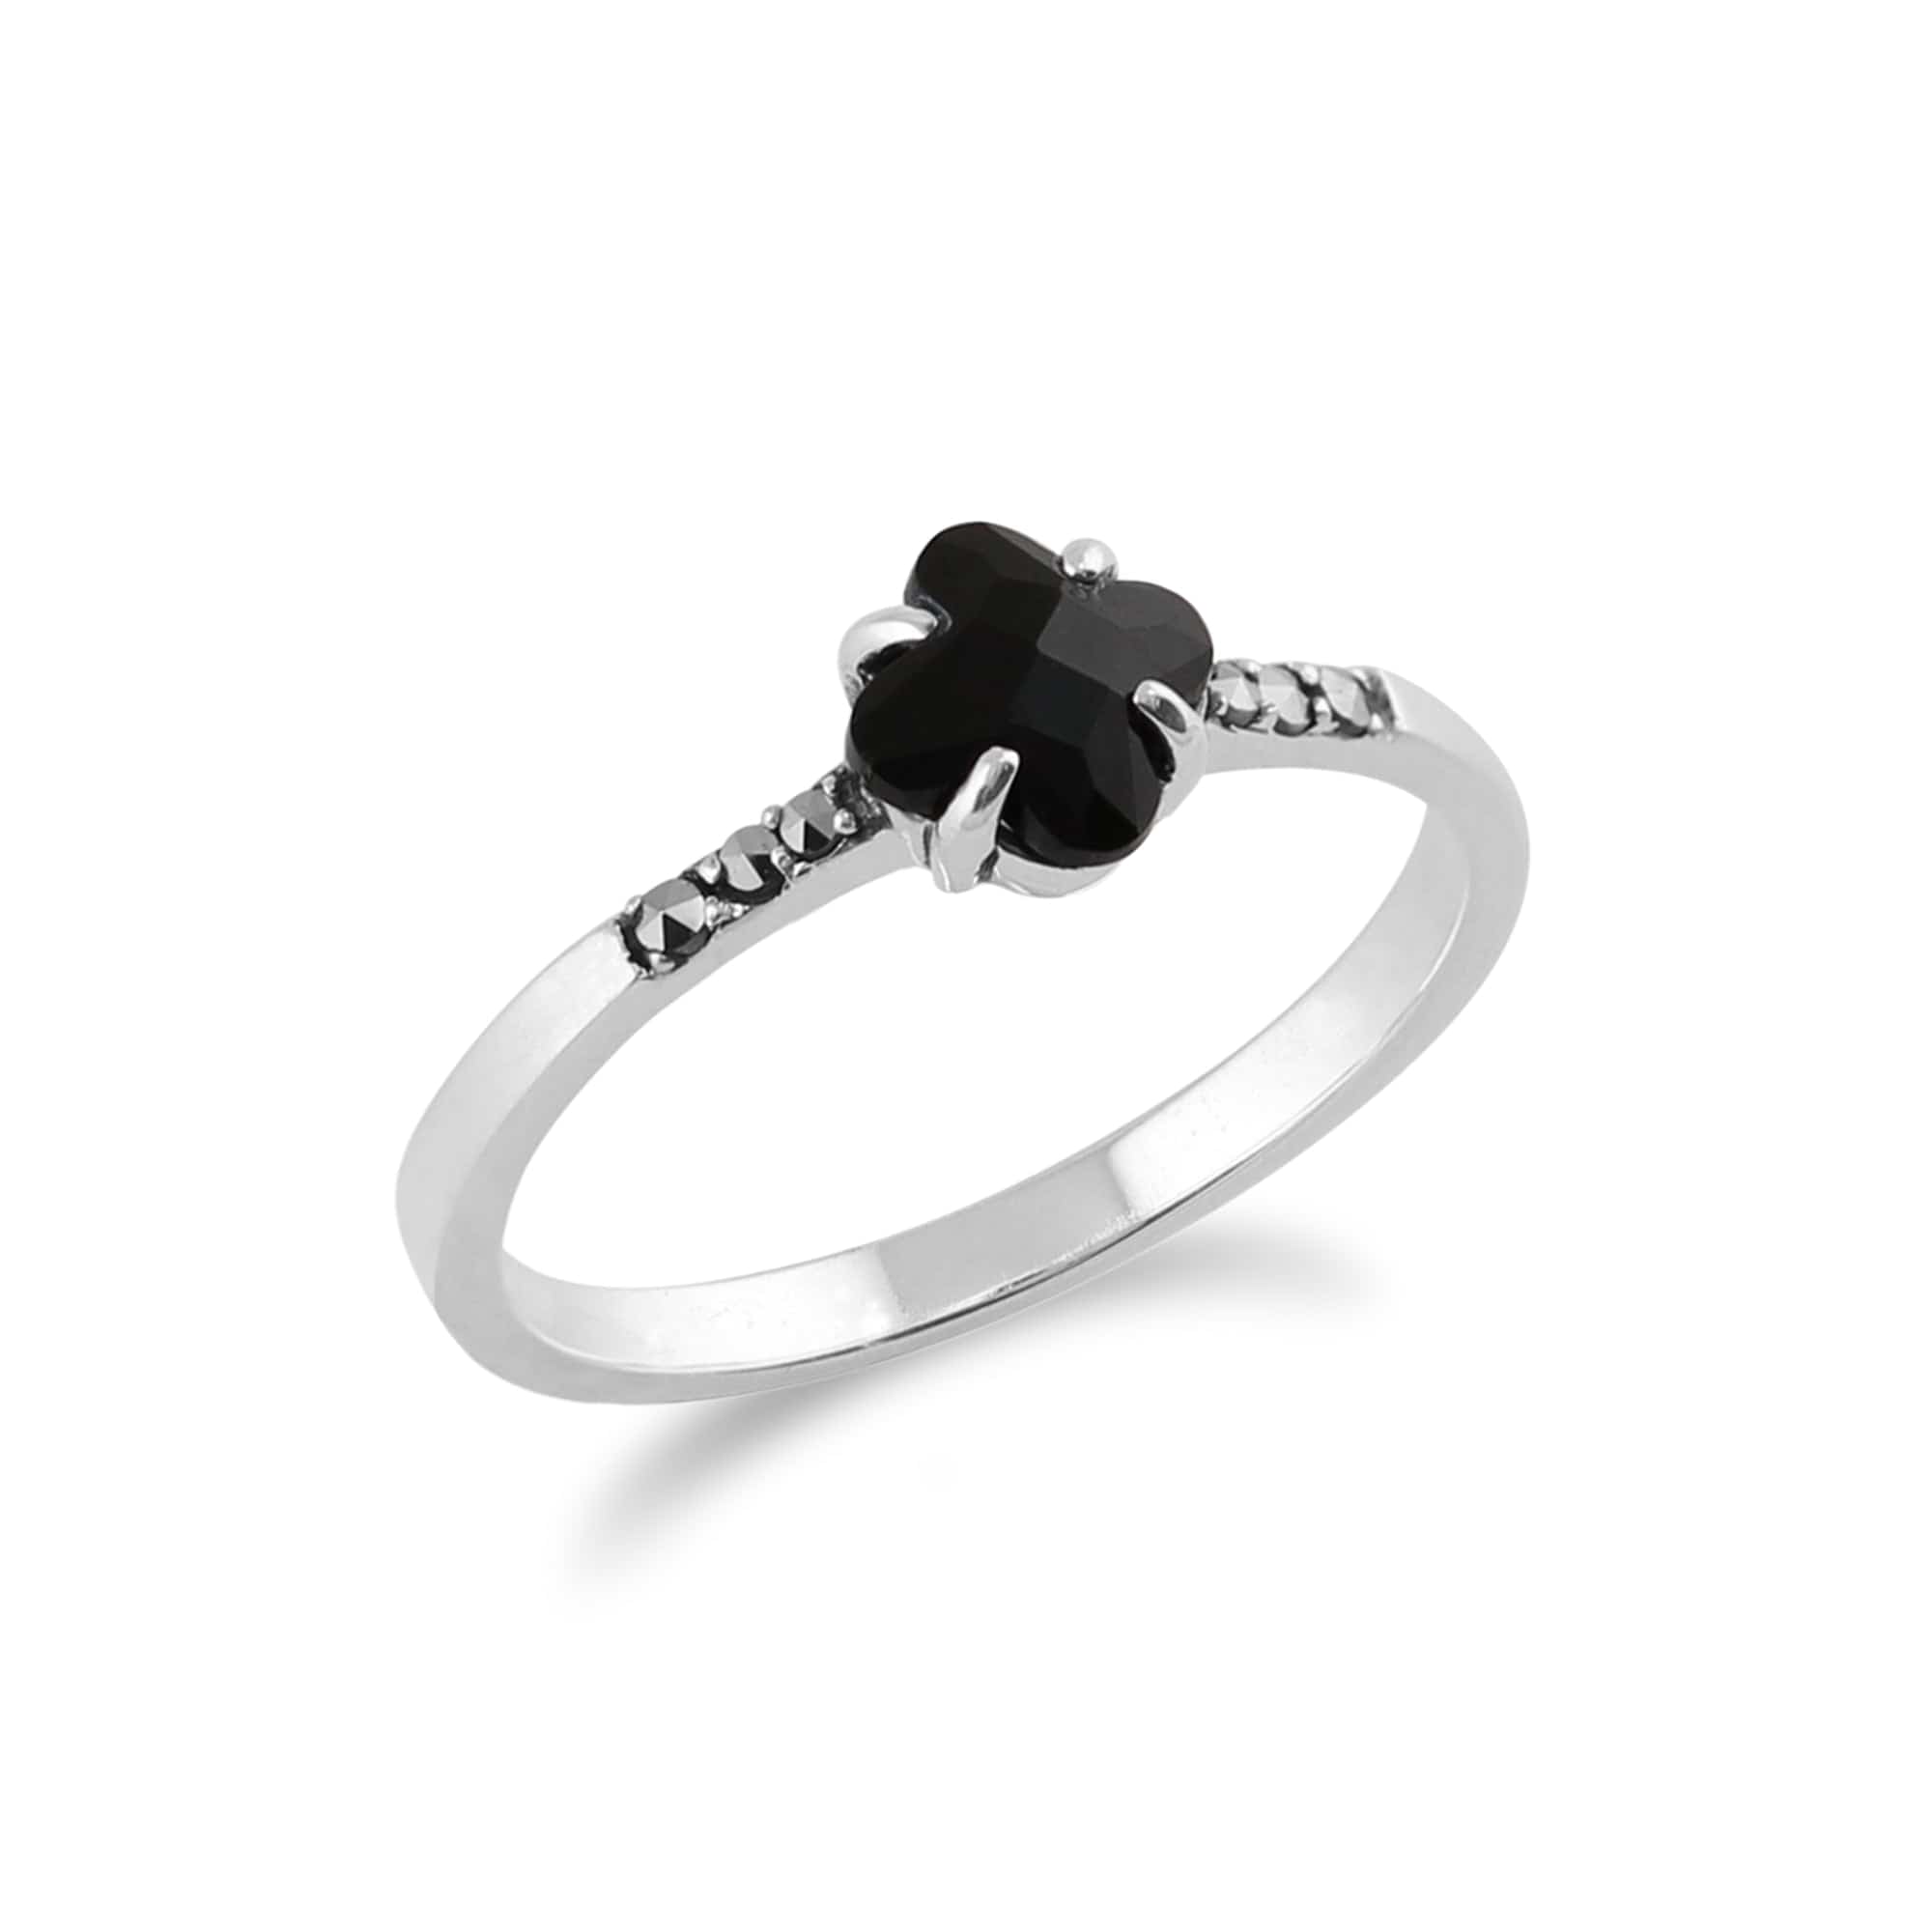 214R485201925 Floral Square Black Onyx & Marcasite Ring in 925 Sterling Silver 2